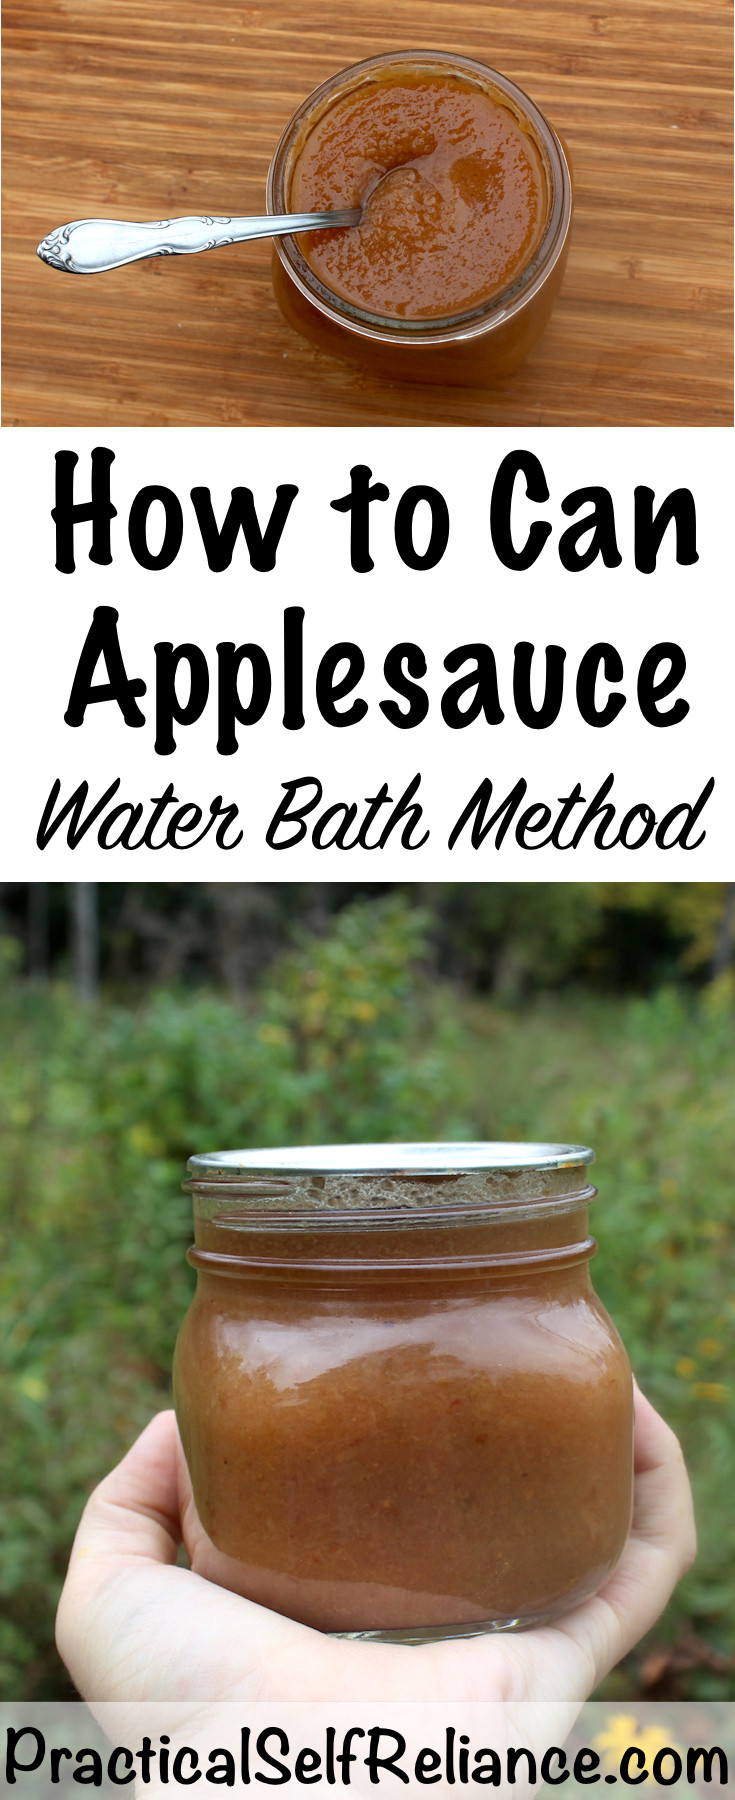 Water Bath Canning Applesauce
 How to Can Applesauce